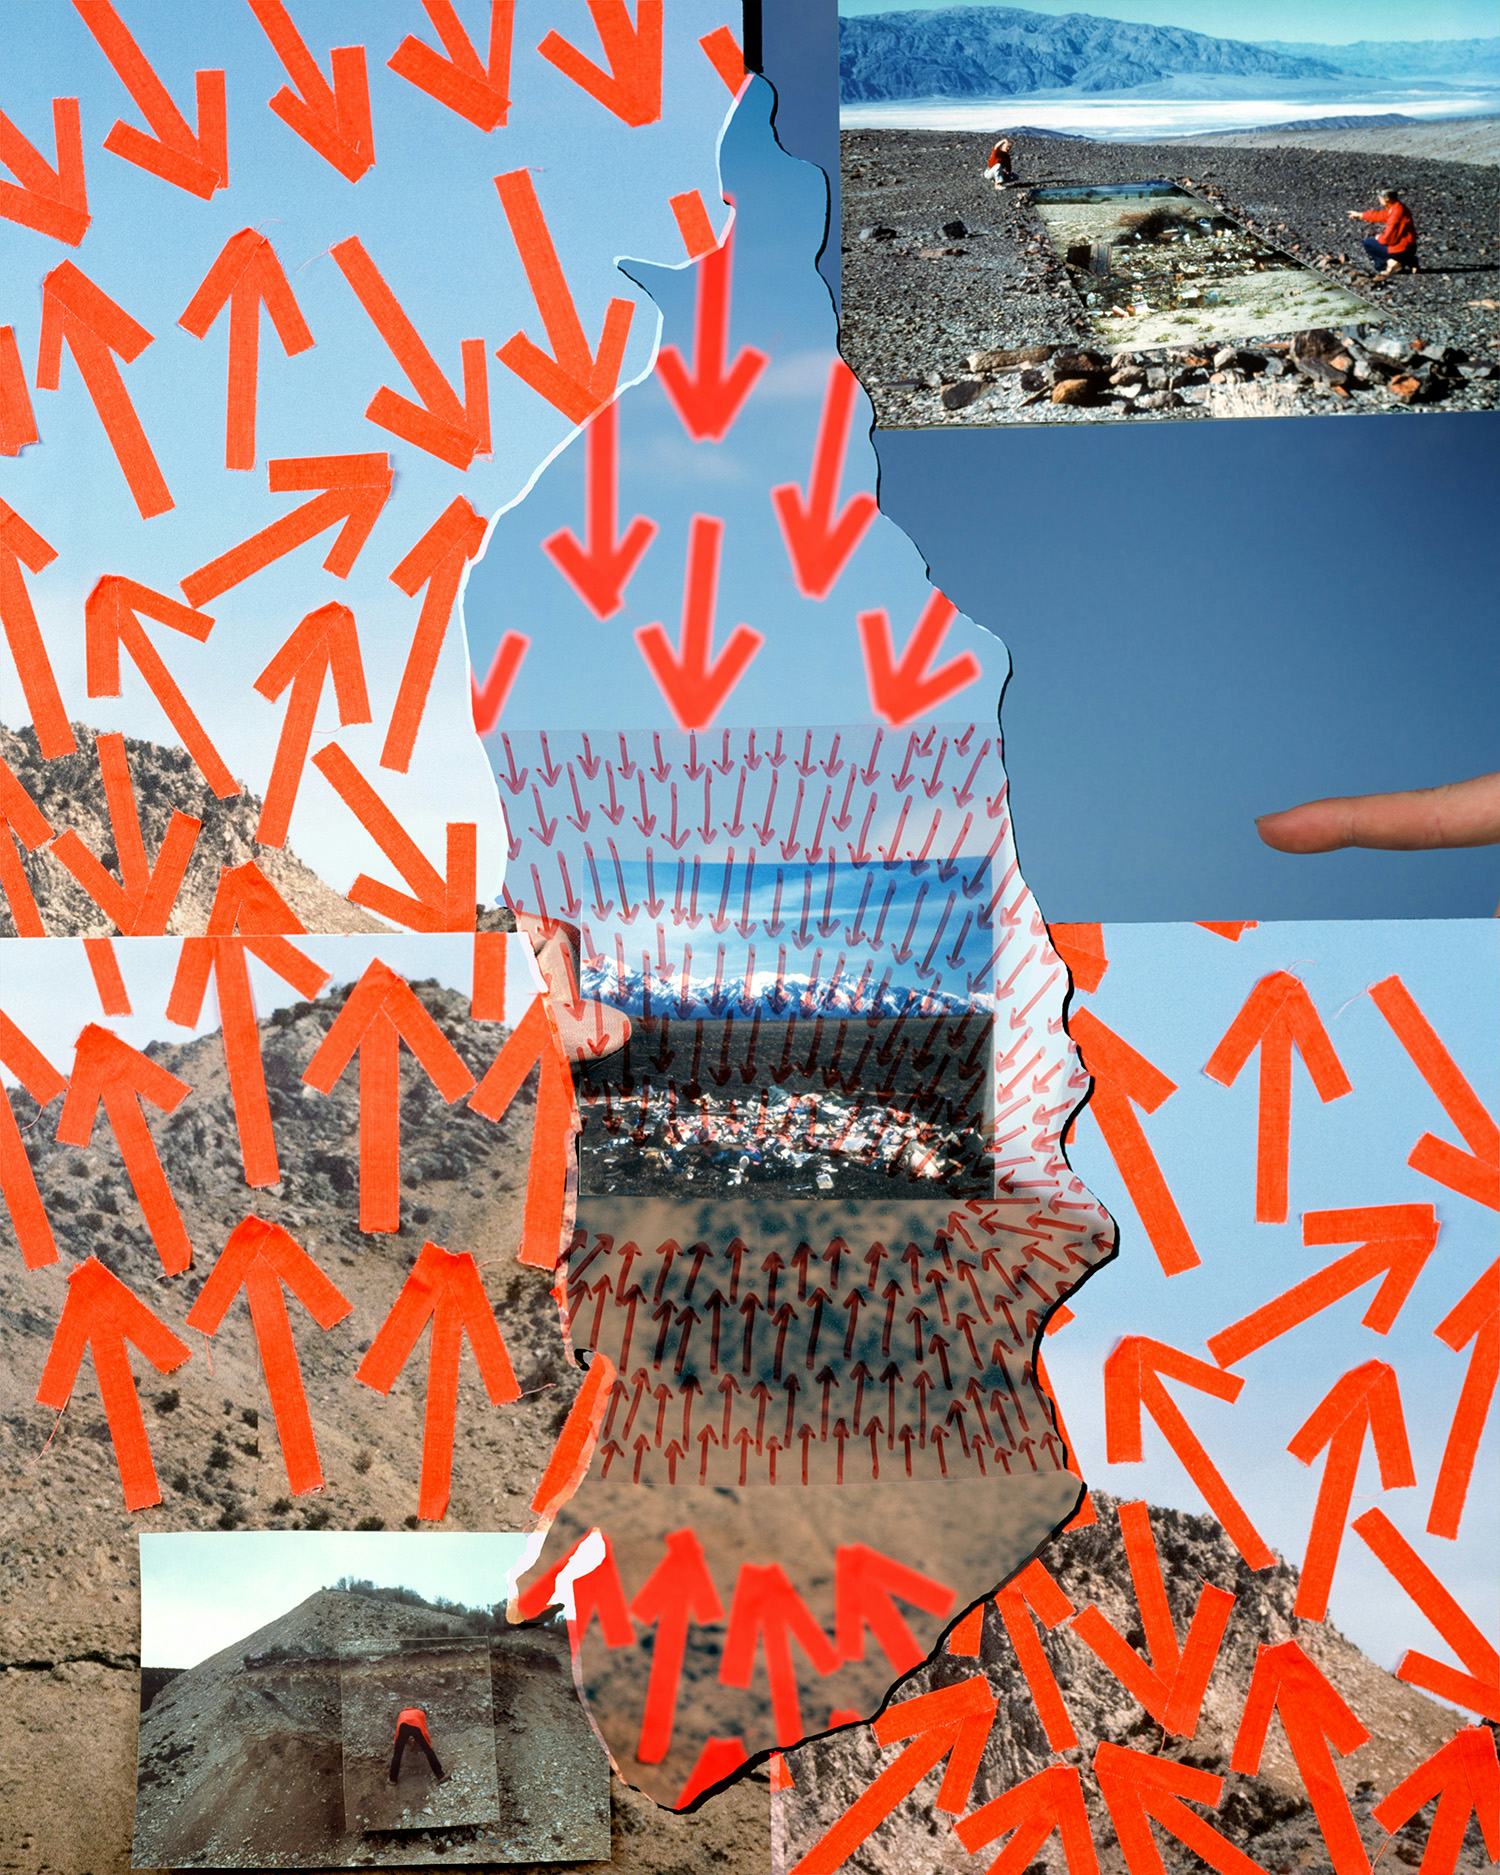 Analogue collage showing several images of the West Desert in Utah, covered in orange arrows © Jaclyn Wrightt